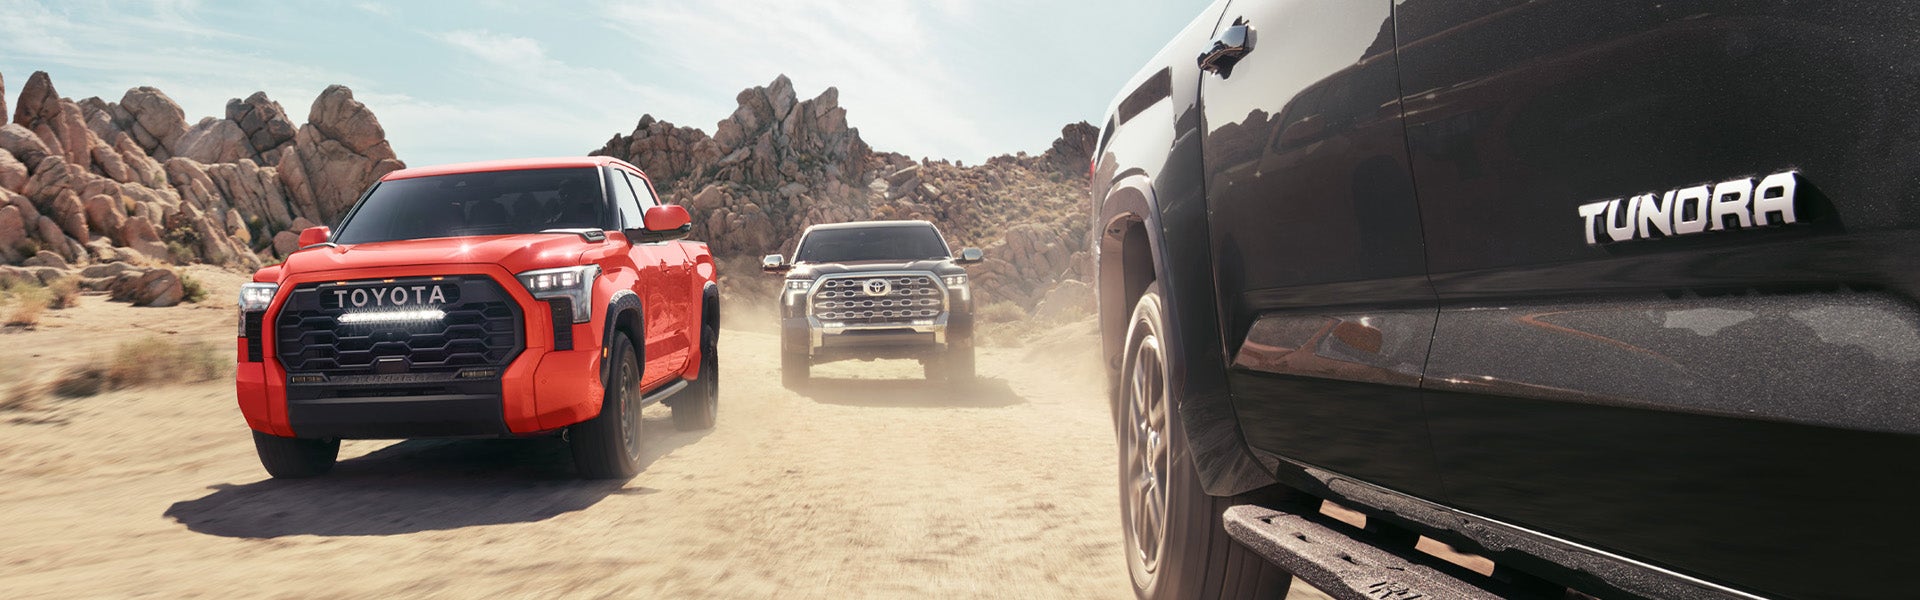 The All-New 2022 Toyota Tundra at Bennett Toyota in Allentown | Three 2022 Toyota Tundra Vehicles Driving Next to Each Other Through Desert